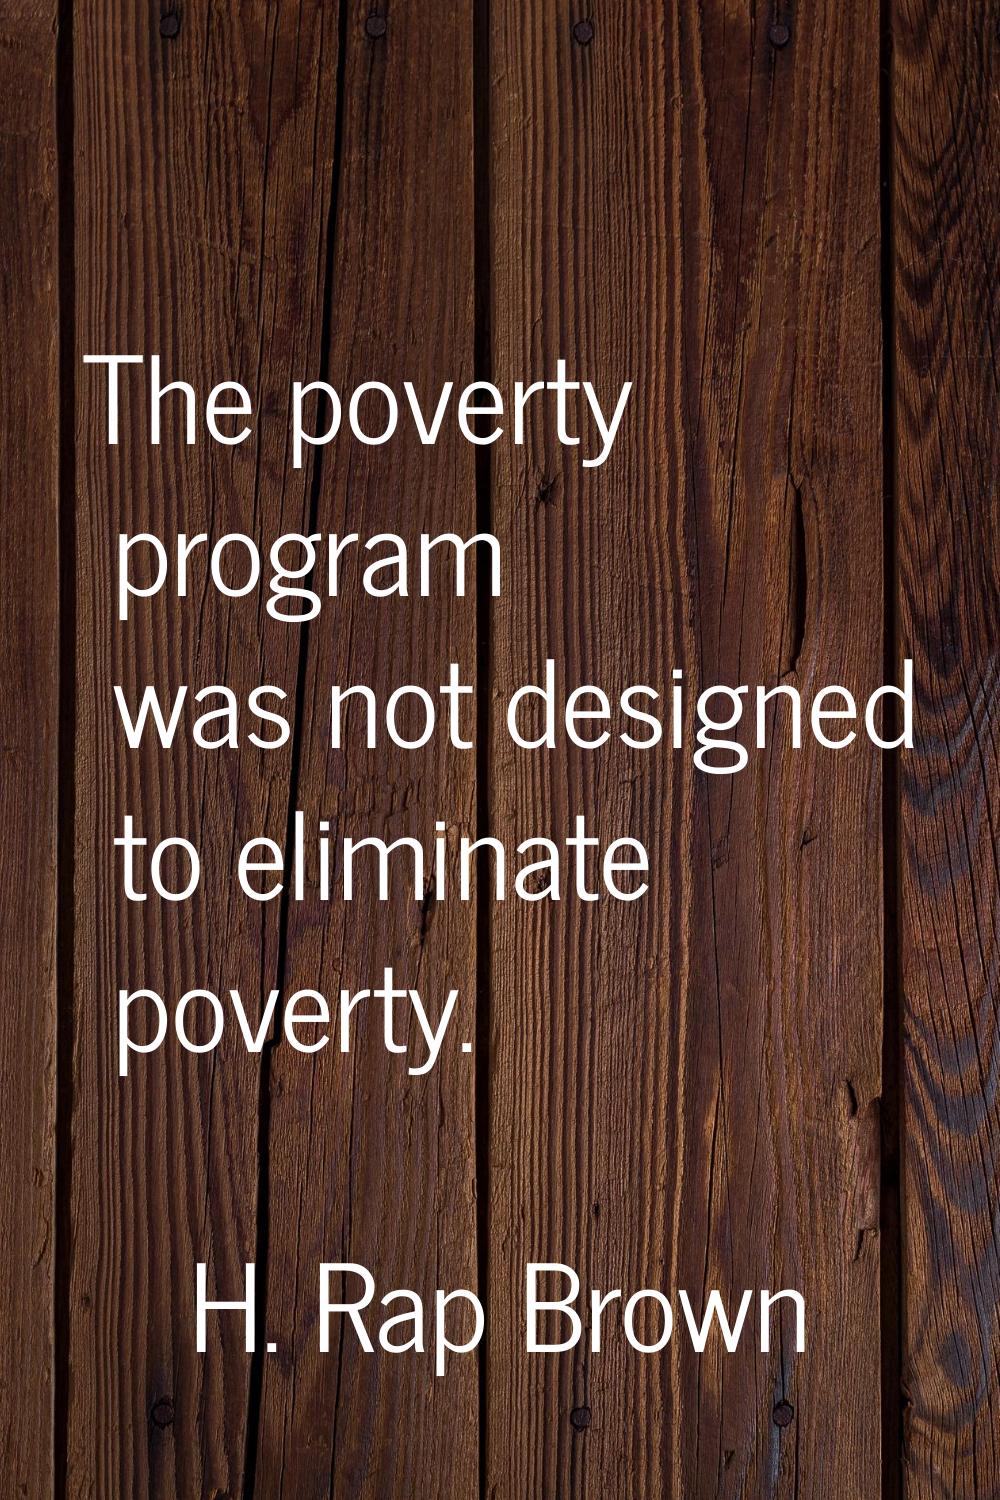 The poverty program was not designed to eliminate poverty.